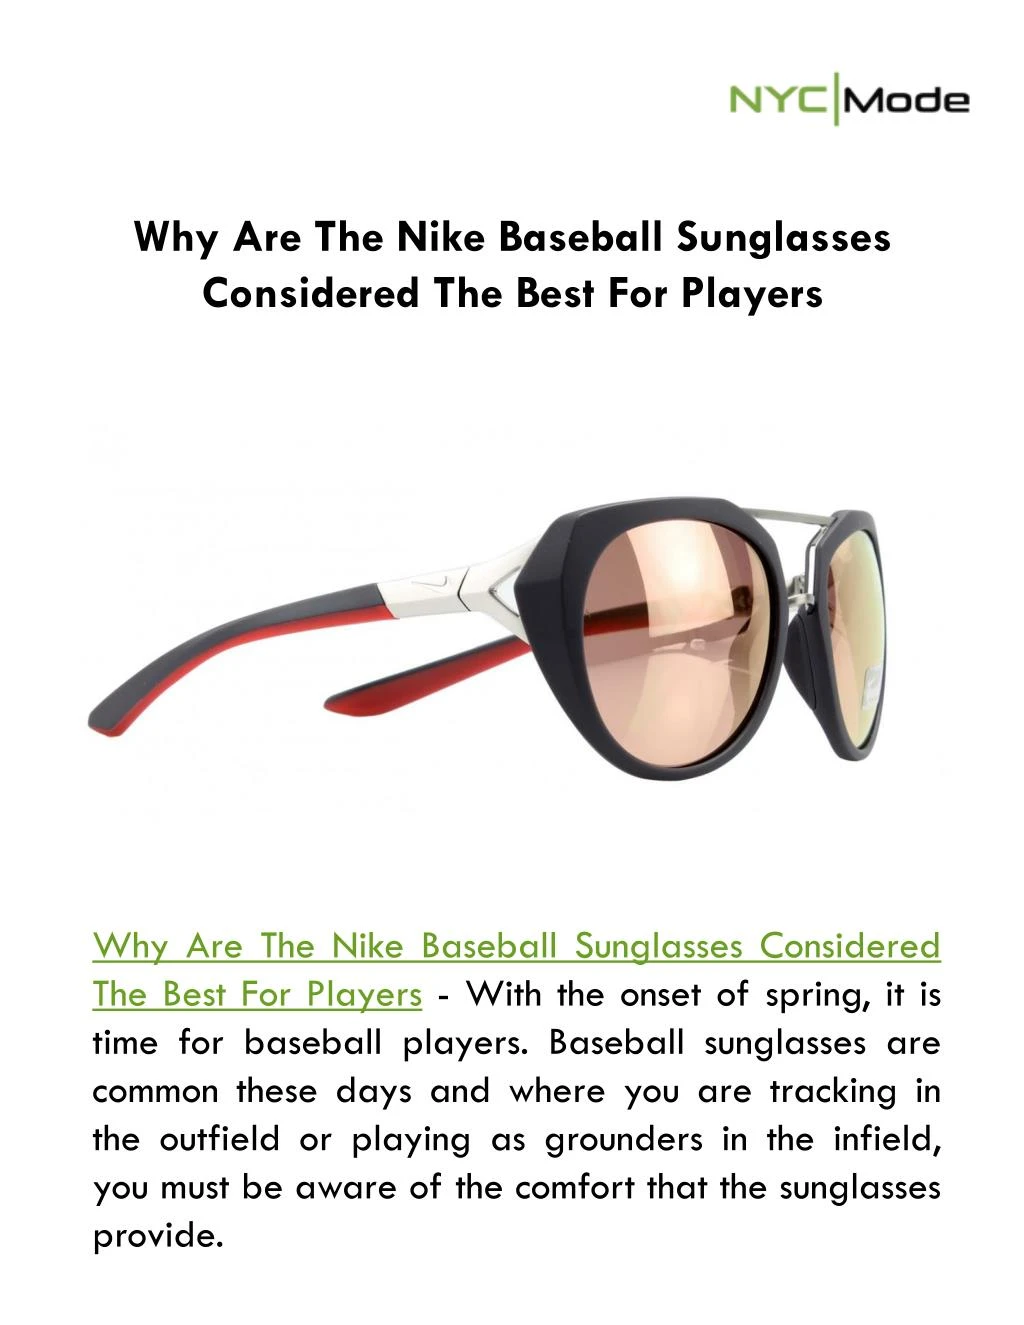 why are the nike baseball sunglasses considered